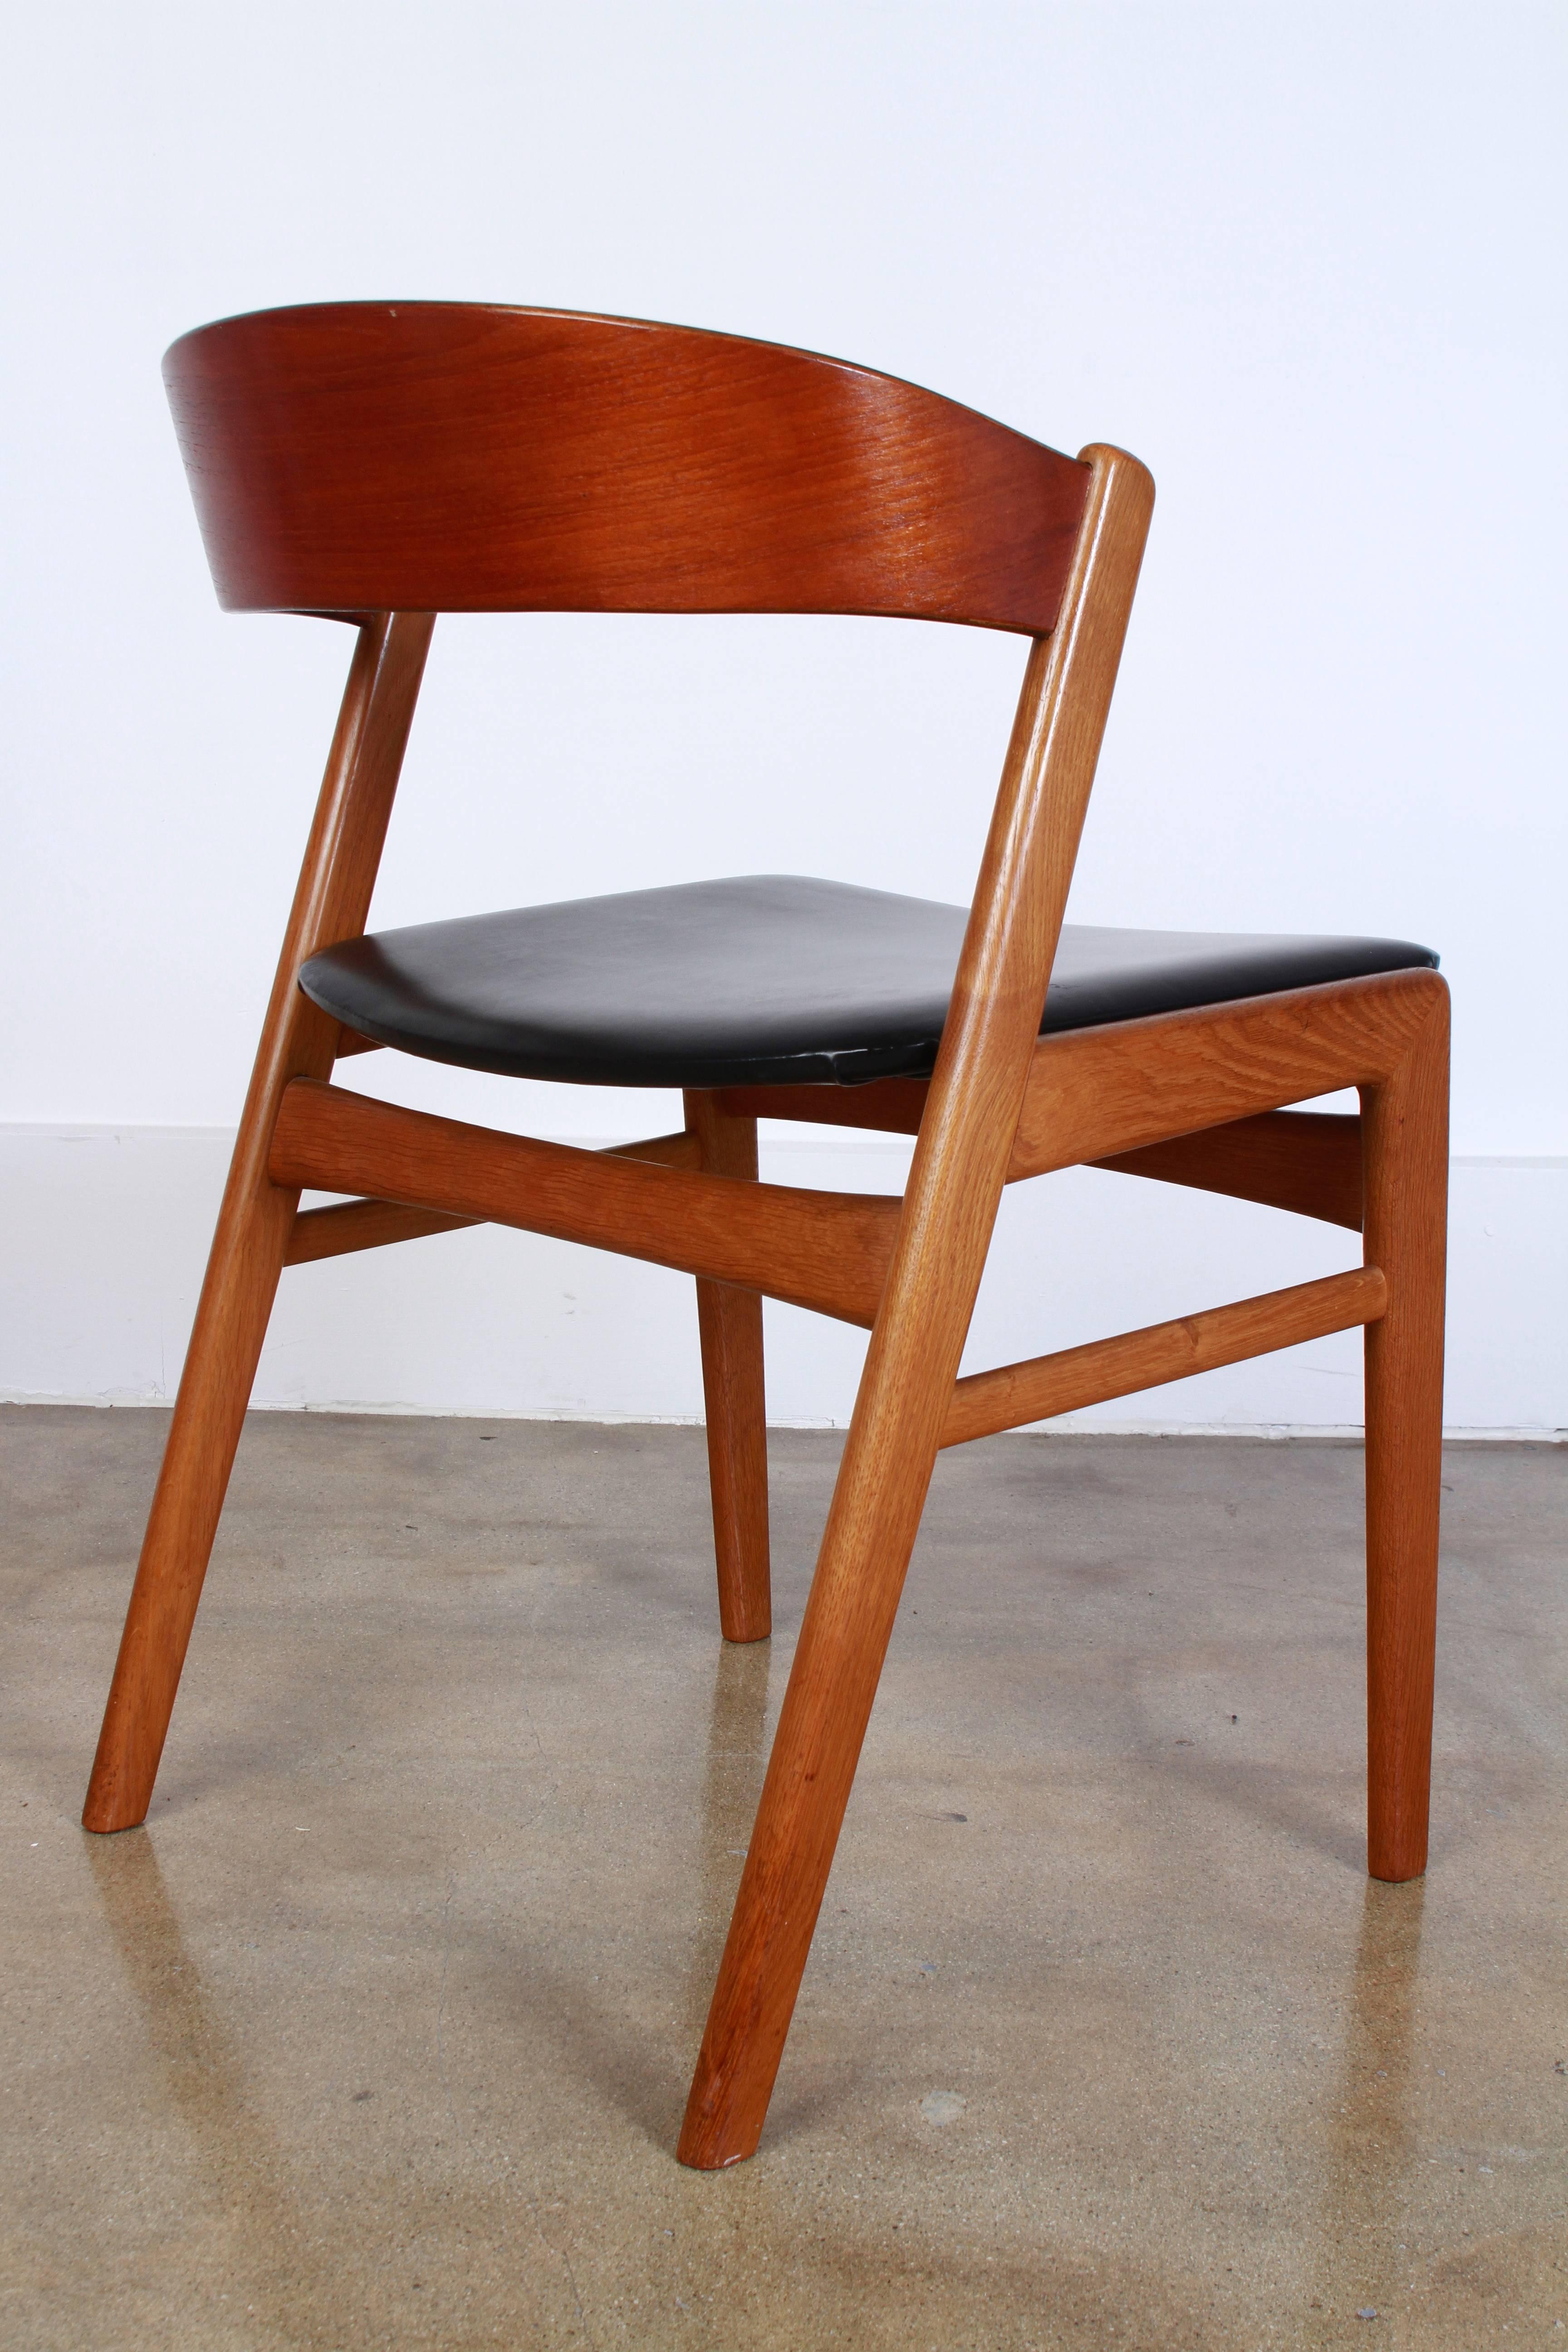 Folke Olhsson for DUX Mid-Century eight Danish wooden chair set
Origin: Denmark
Period: Mid-Century
Materials: Stained wood, vinyl
Condition: Excellent.